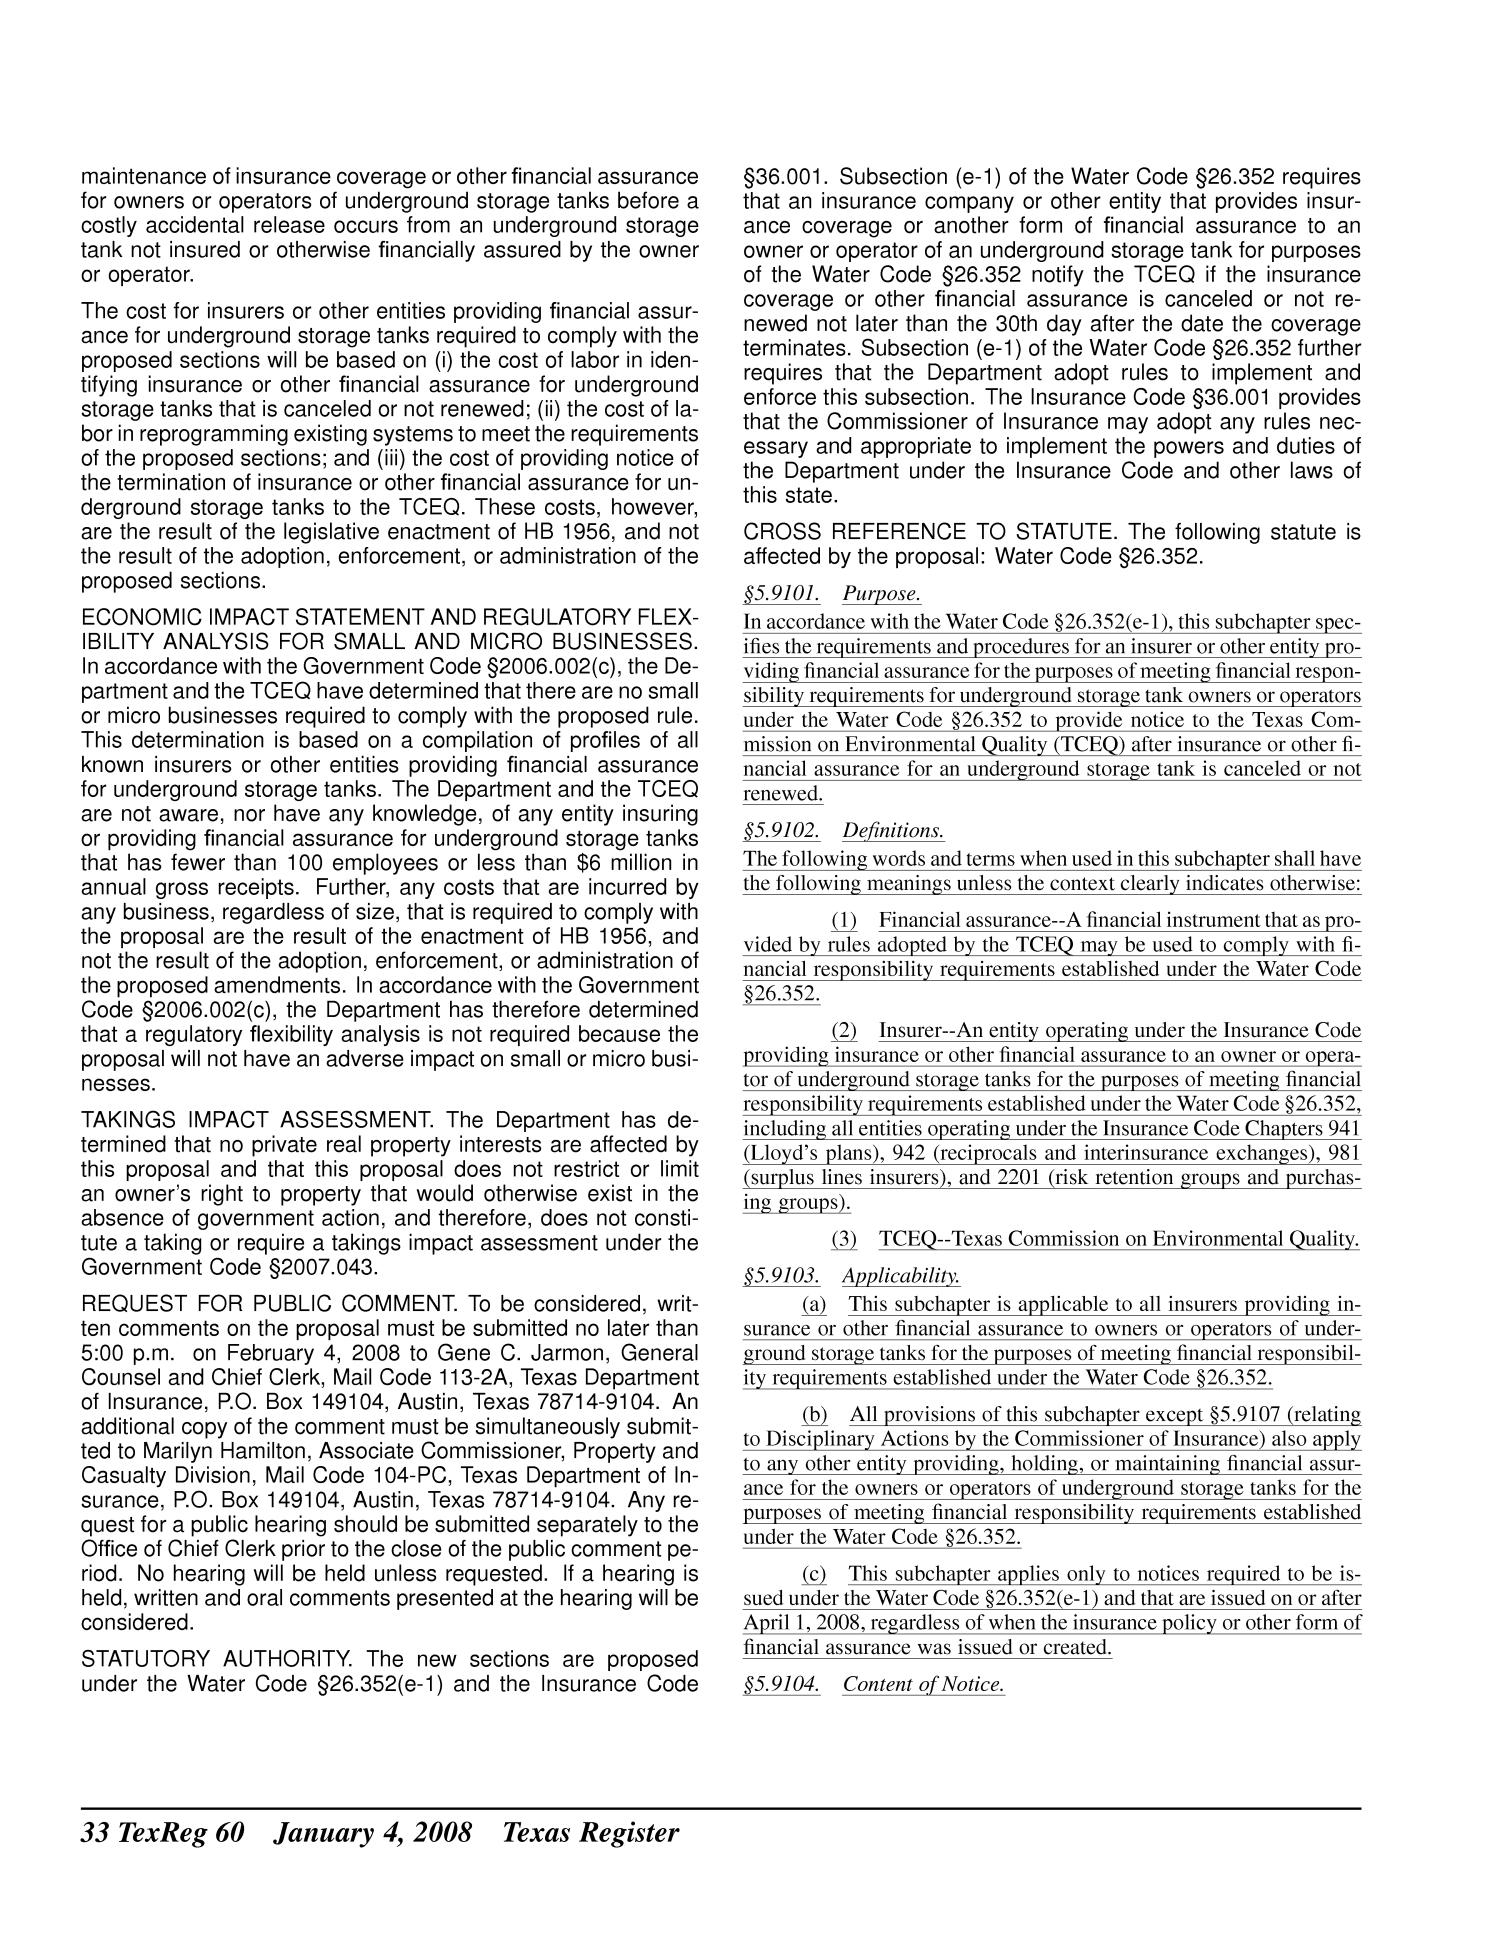 Texas Register, Volume 33, Number 1, Pages 1-358, January 4, 2008
                                                
                                                    60
                                                